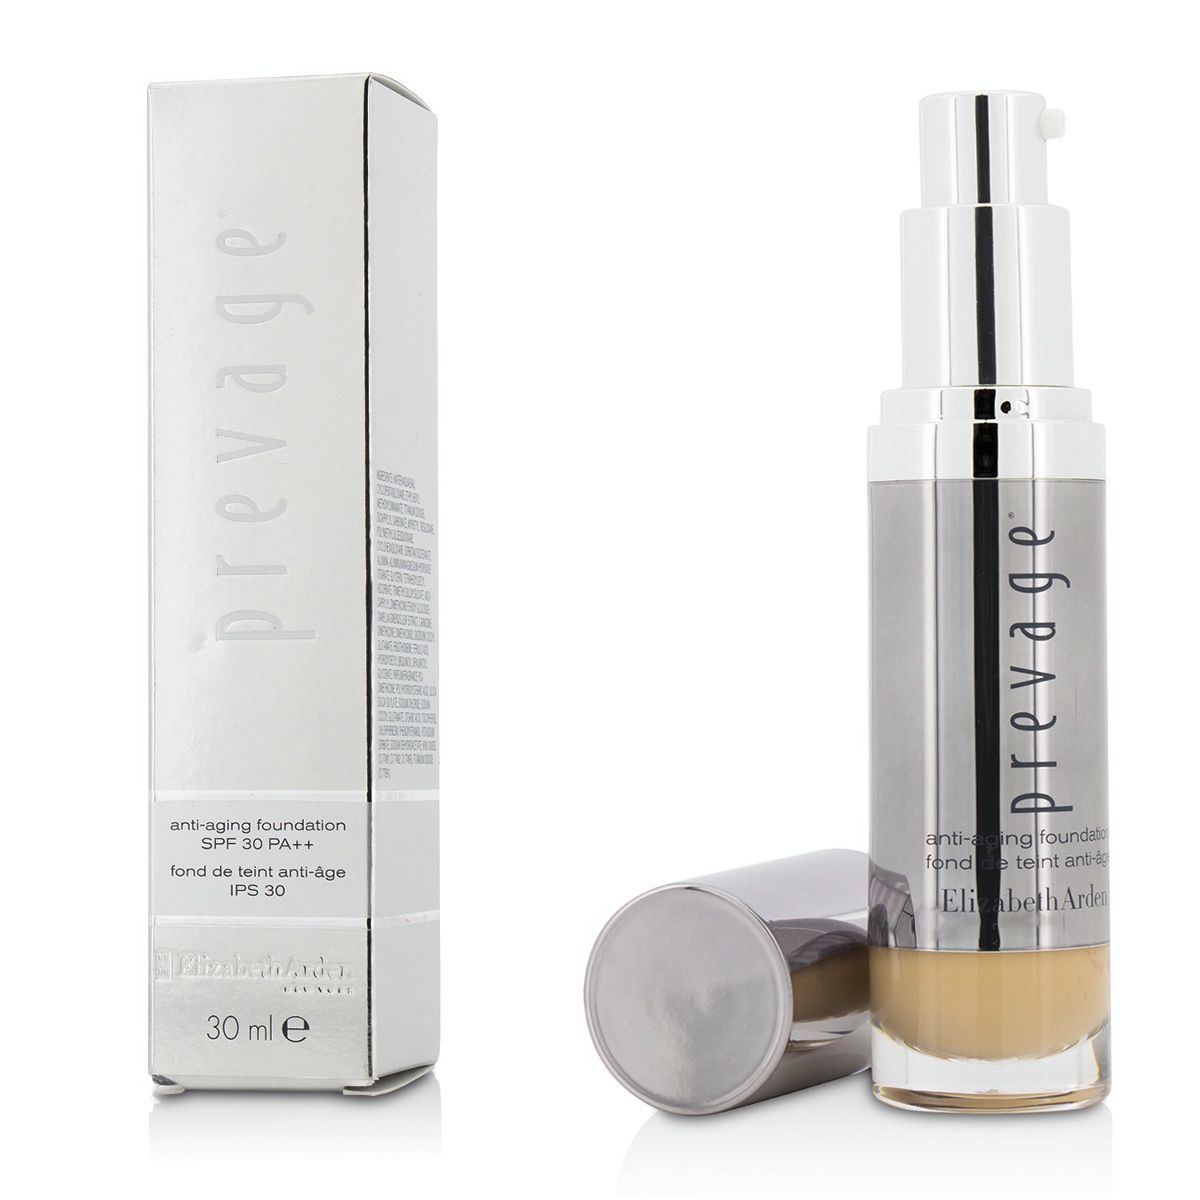 Anti Aging Foundation SPF 30 - Shade 01 Prevage Image